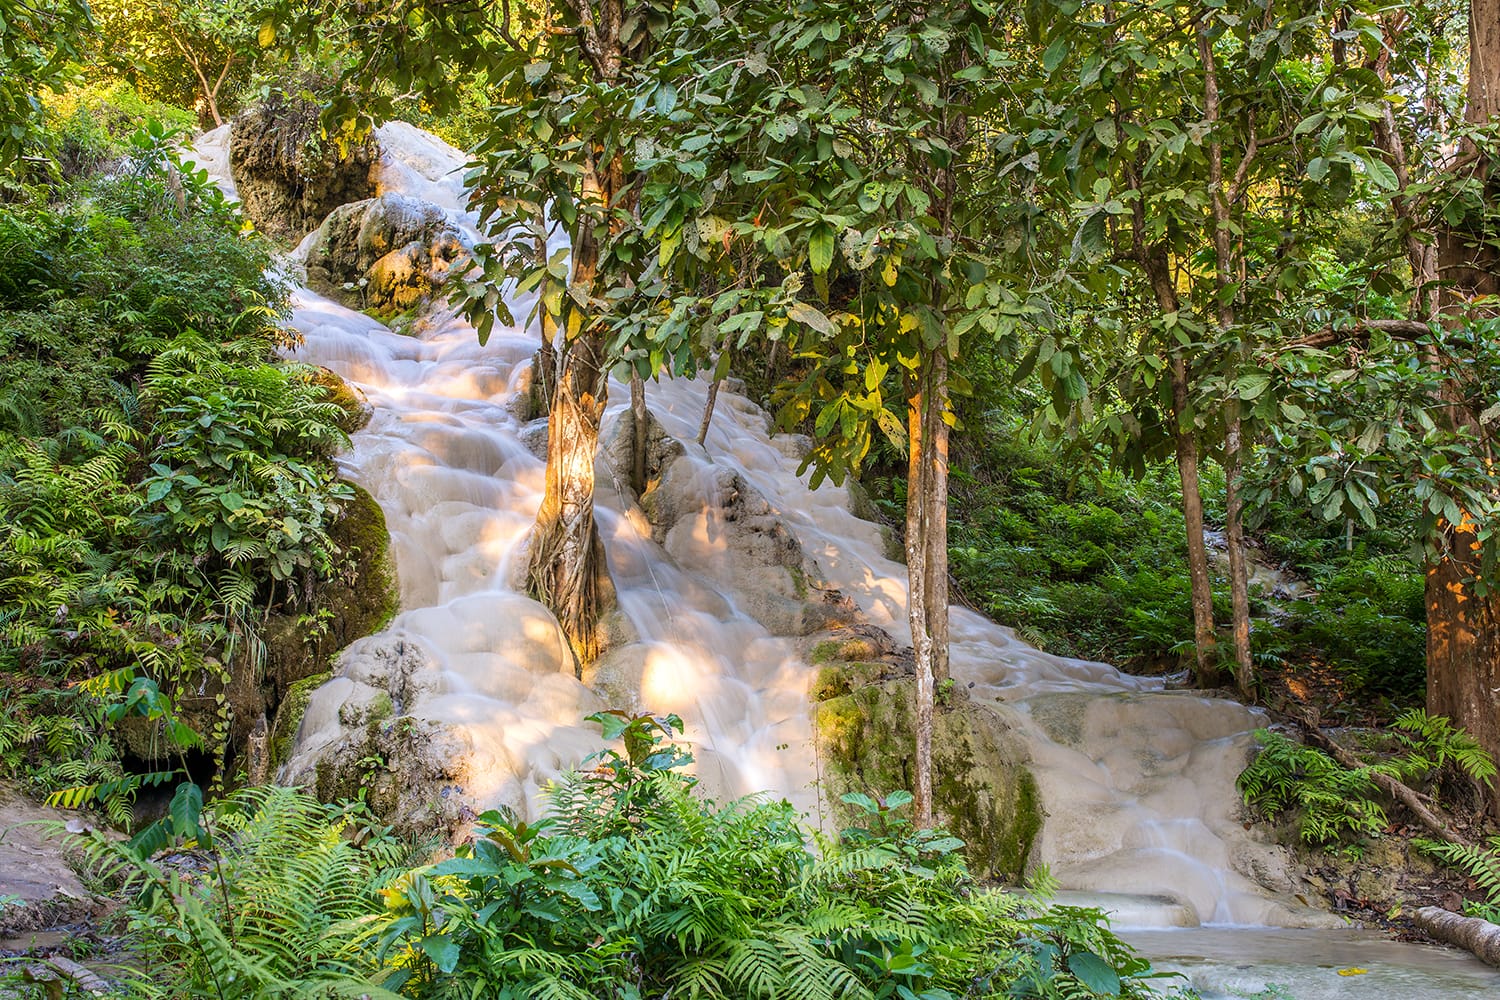 Namtok Bua Tong (Sticky waterfall) in Northern Thailand